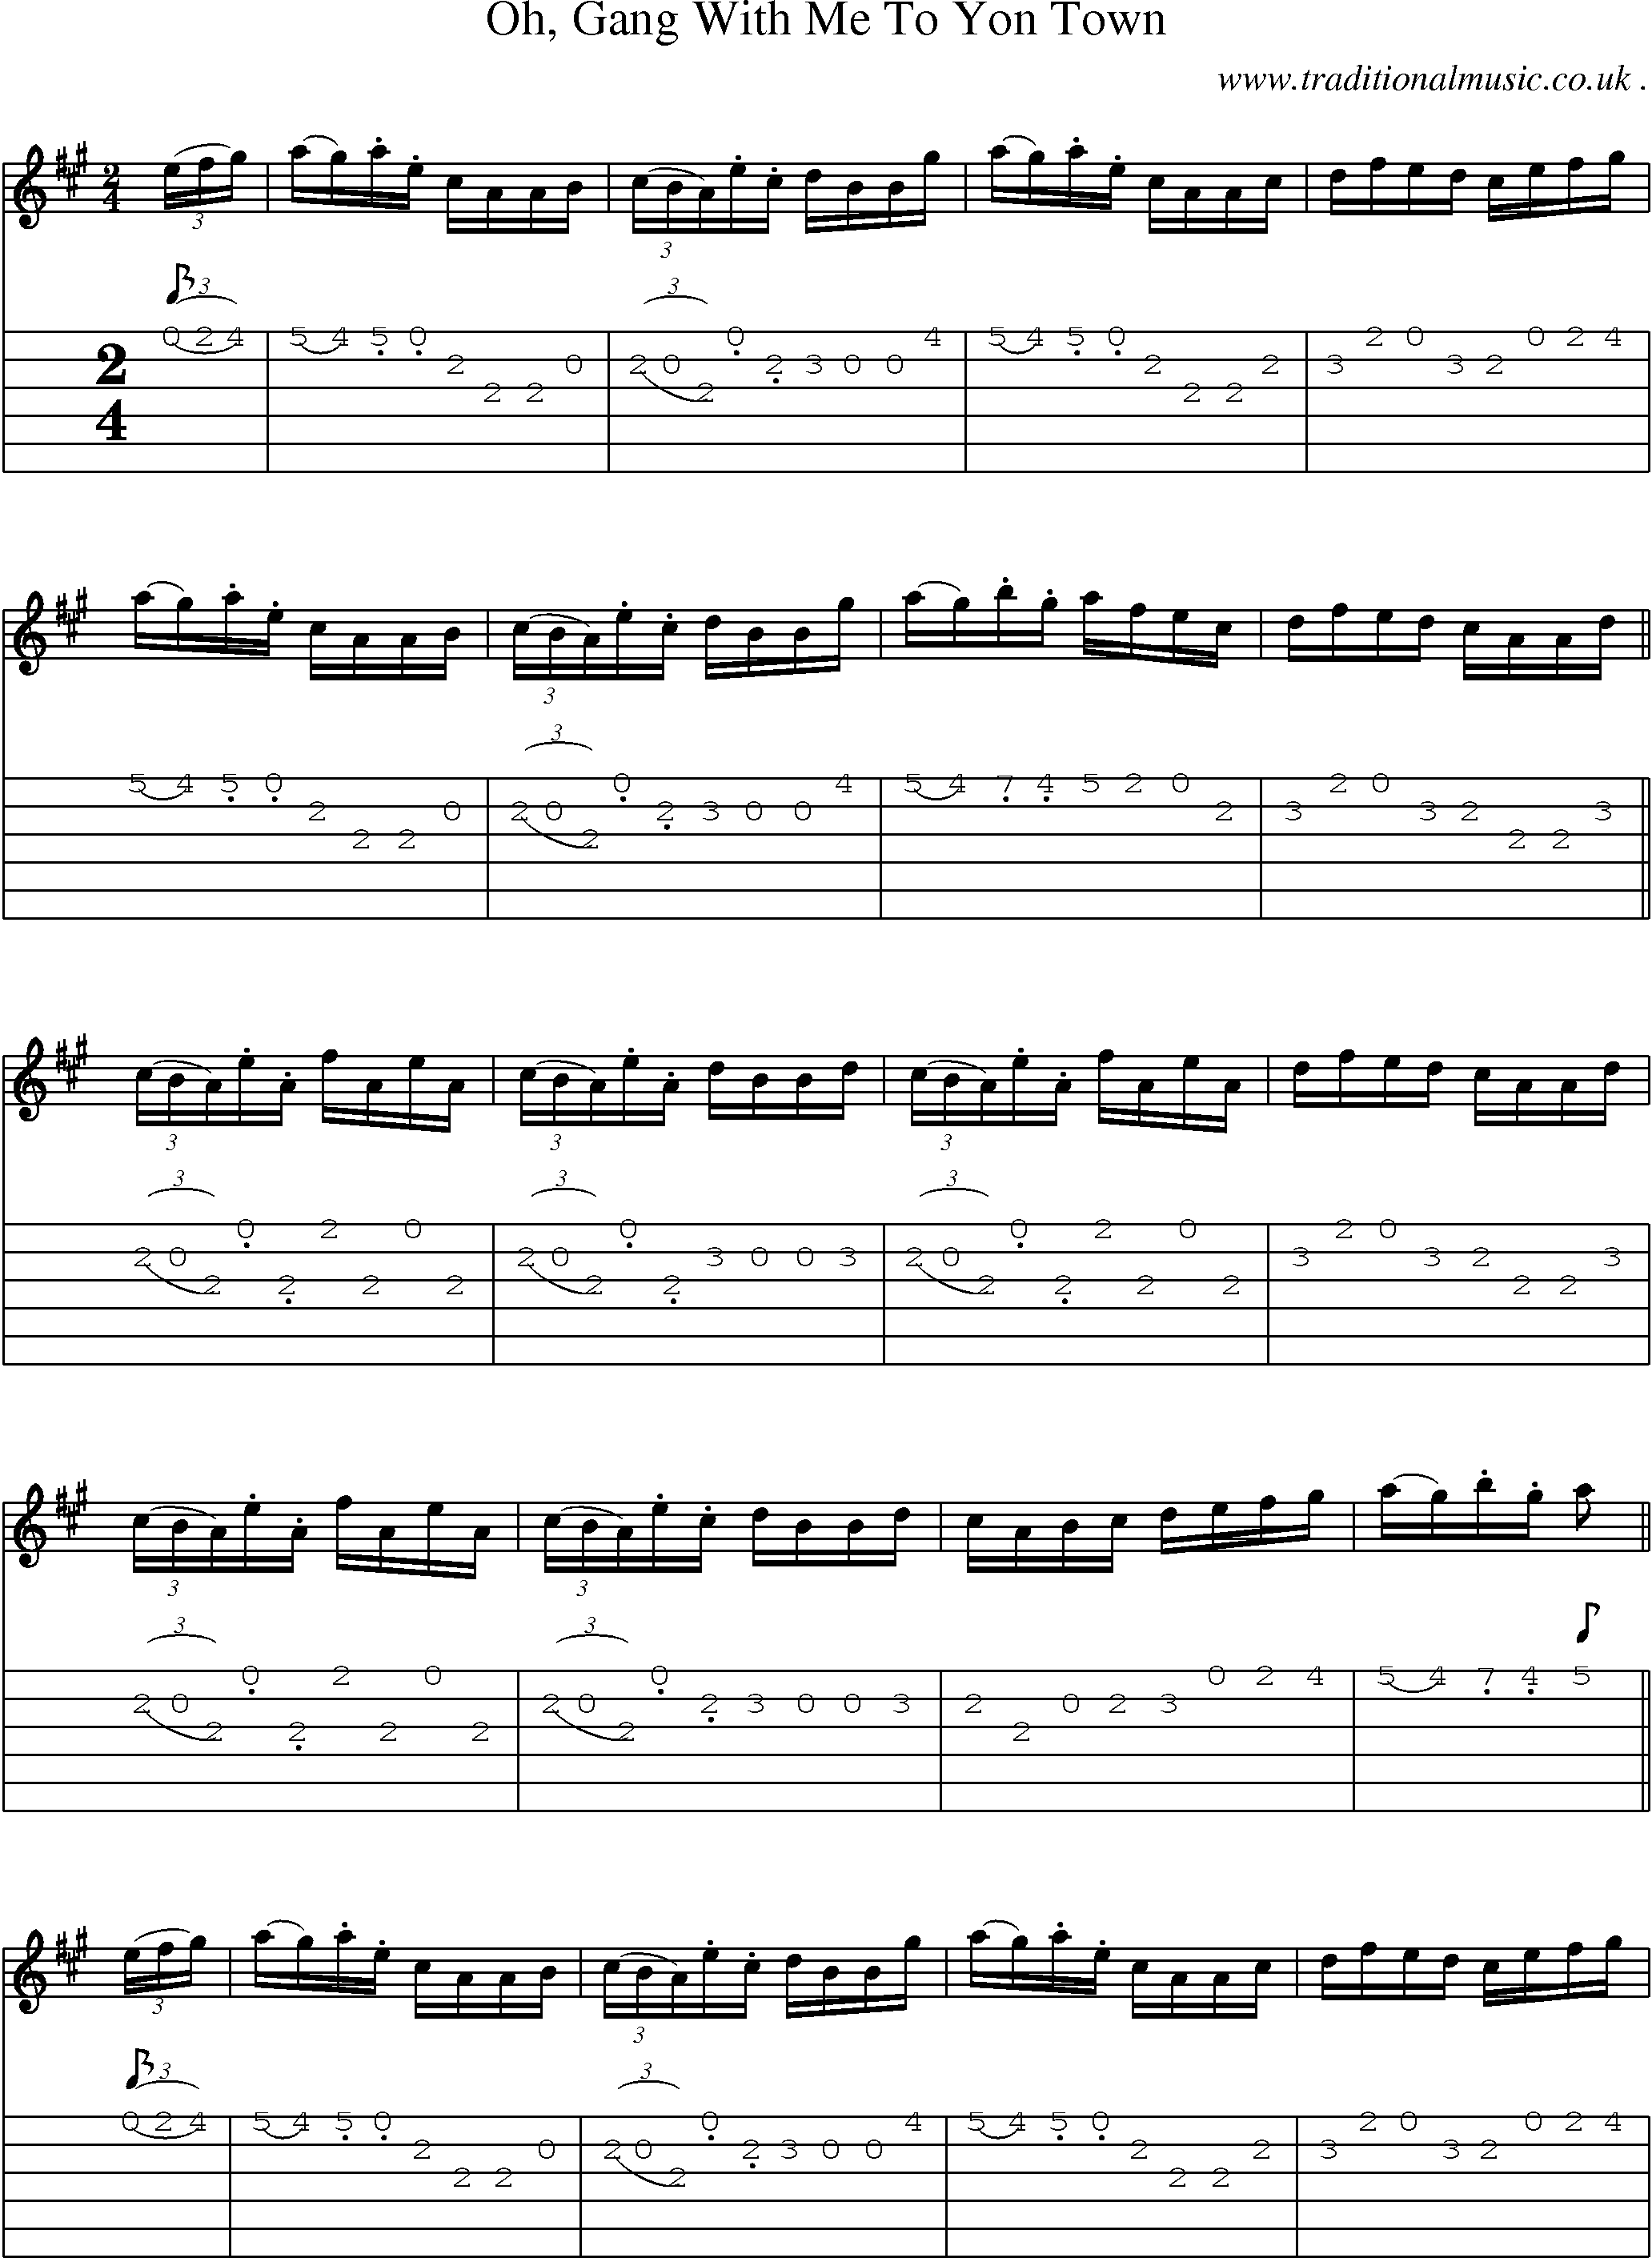 Sheet-Music and Guitar Tabs for Oh Gang With Me To Yon Town